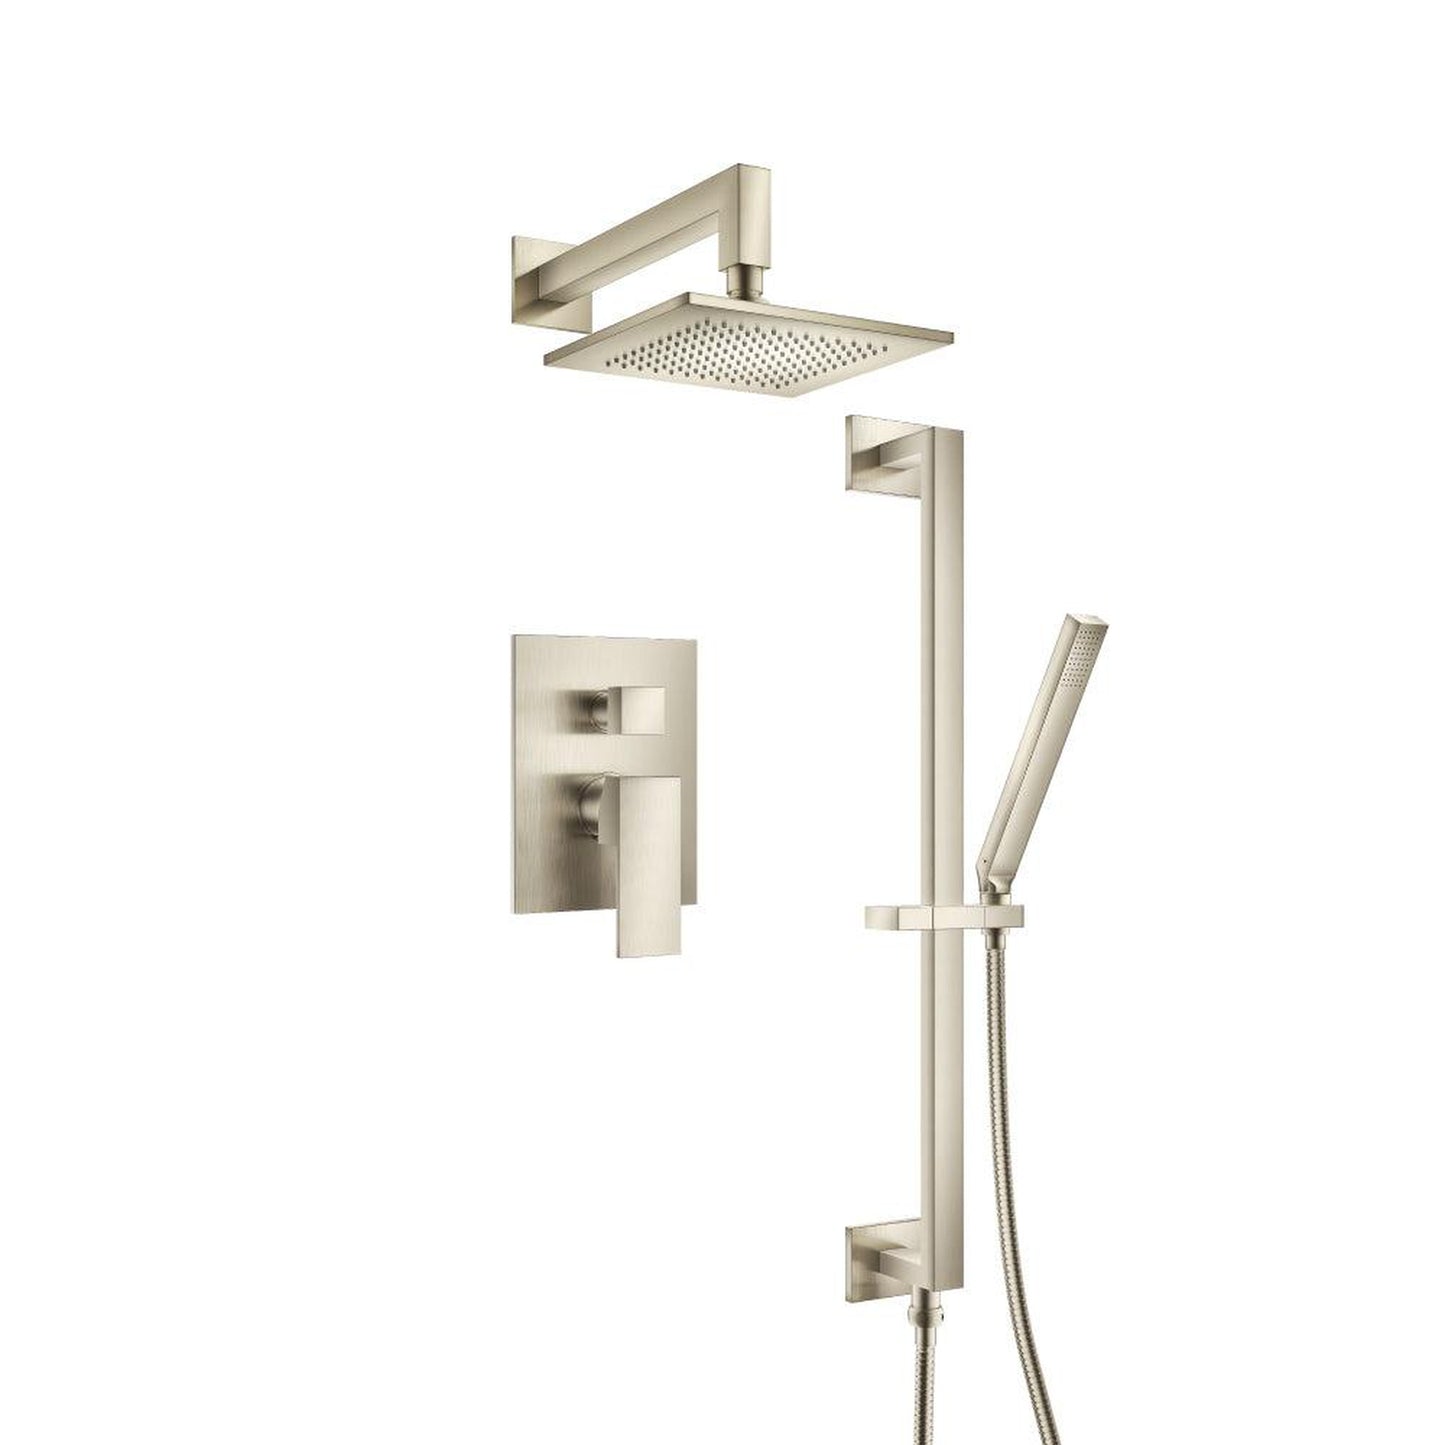 Isenberg Serie 160 Two Output Shower Set With Shower Head, Hand Held and Slide Bar in Brushed Nickel (160.3450BN)